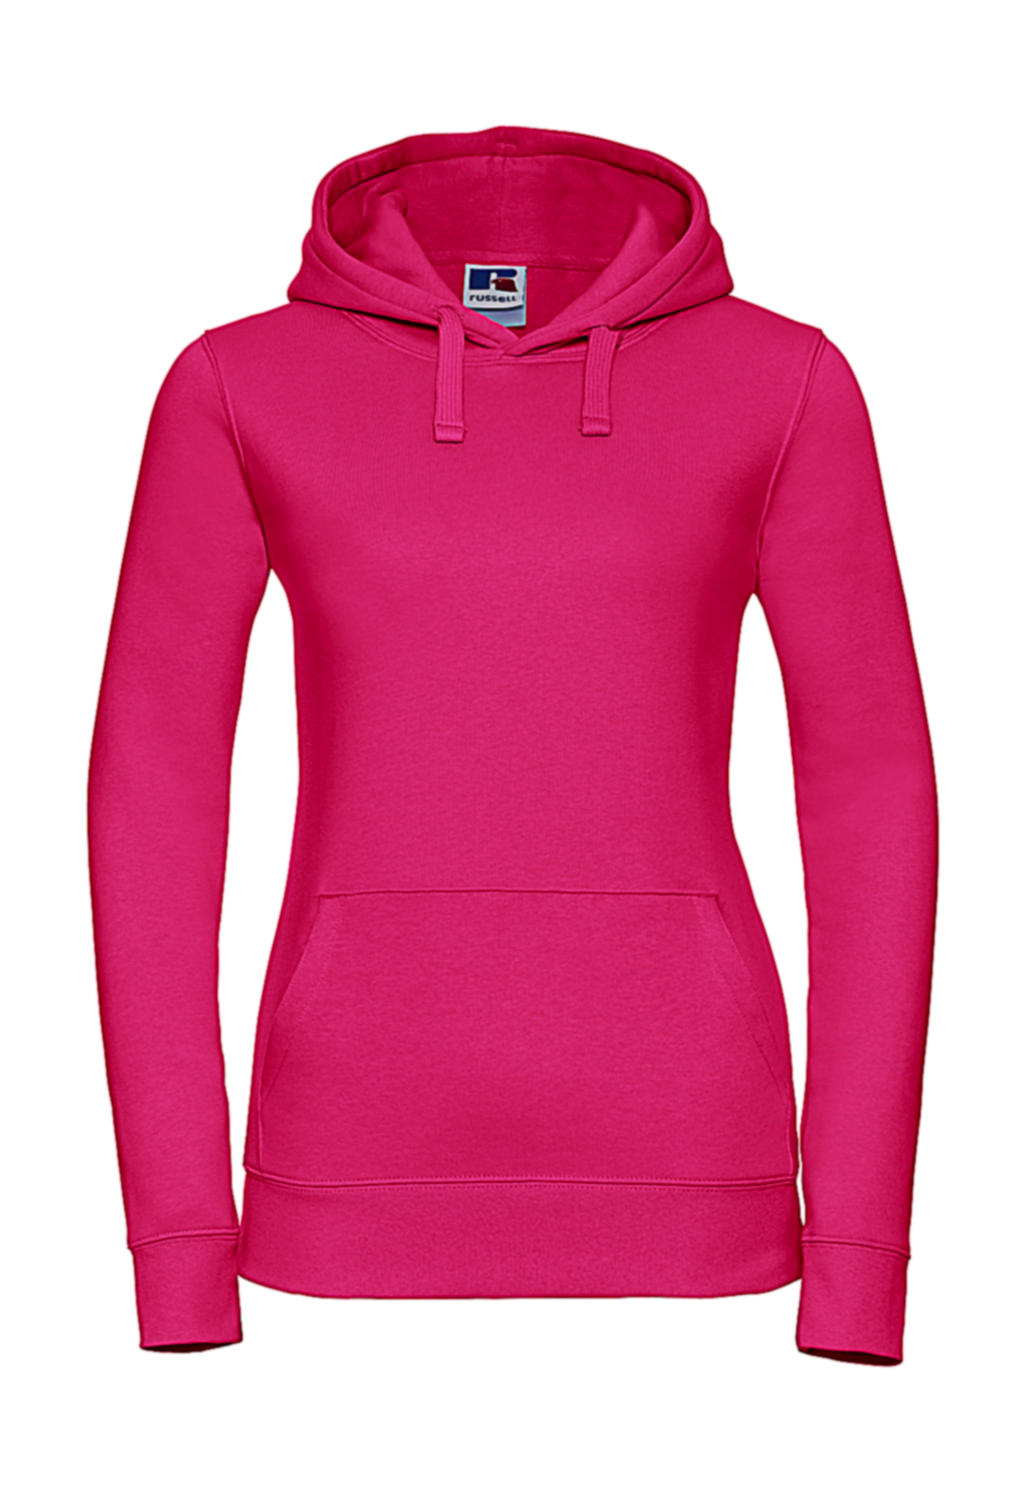  Ladies Authentic Hooded Sweat in Farbe Fuchsia